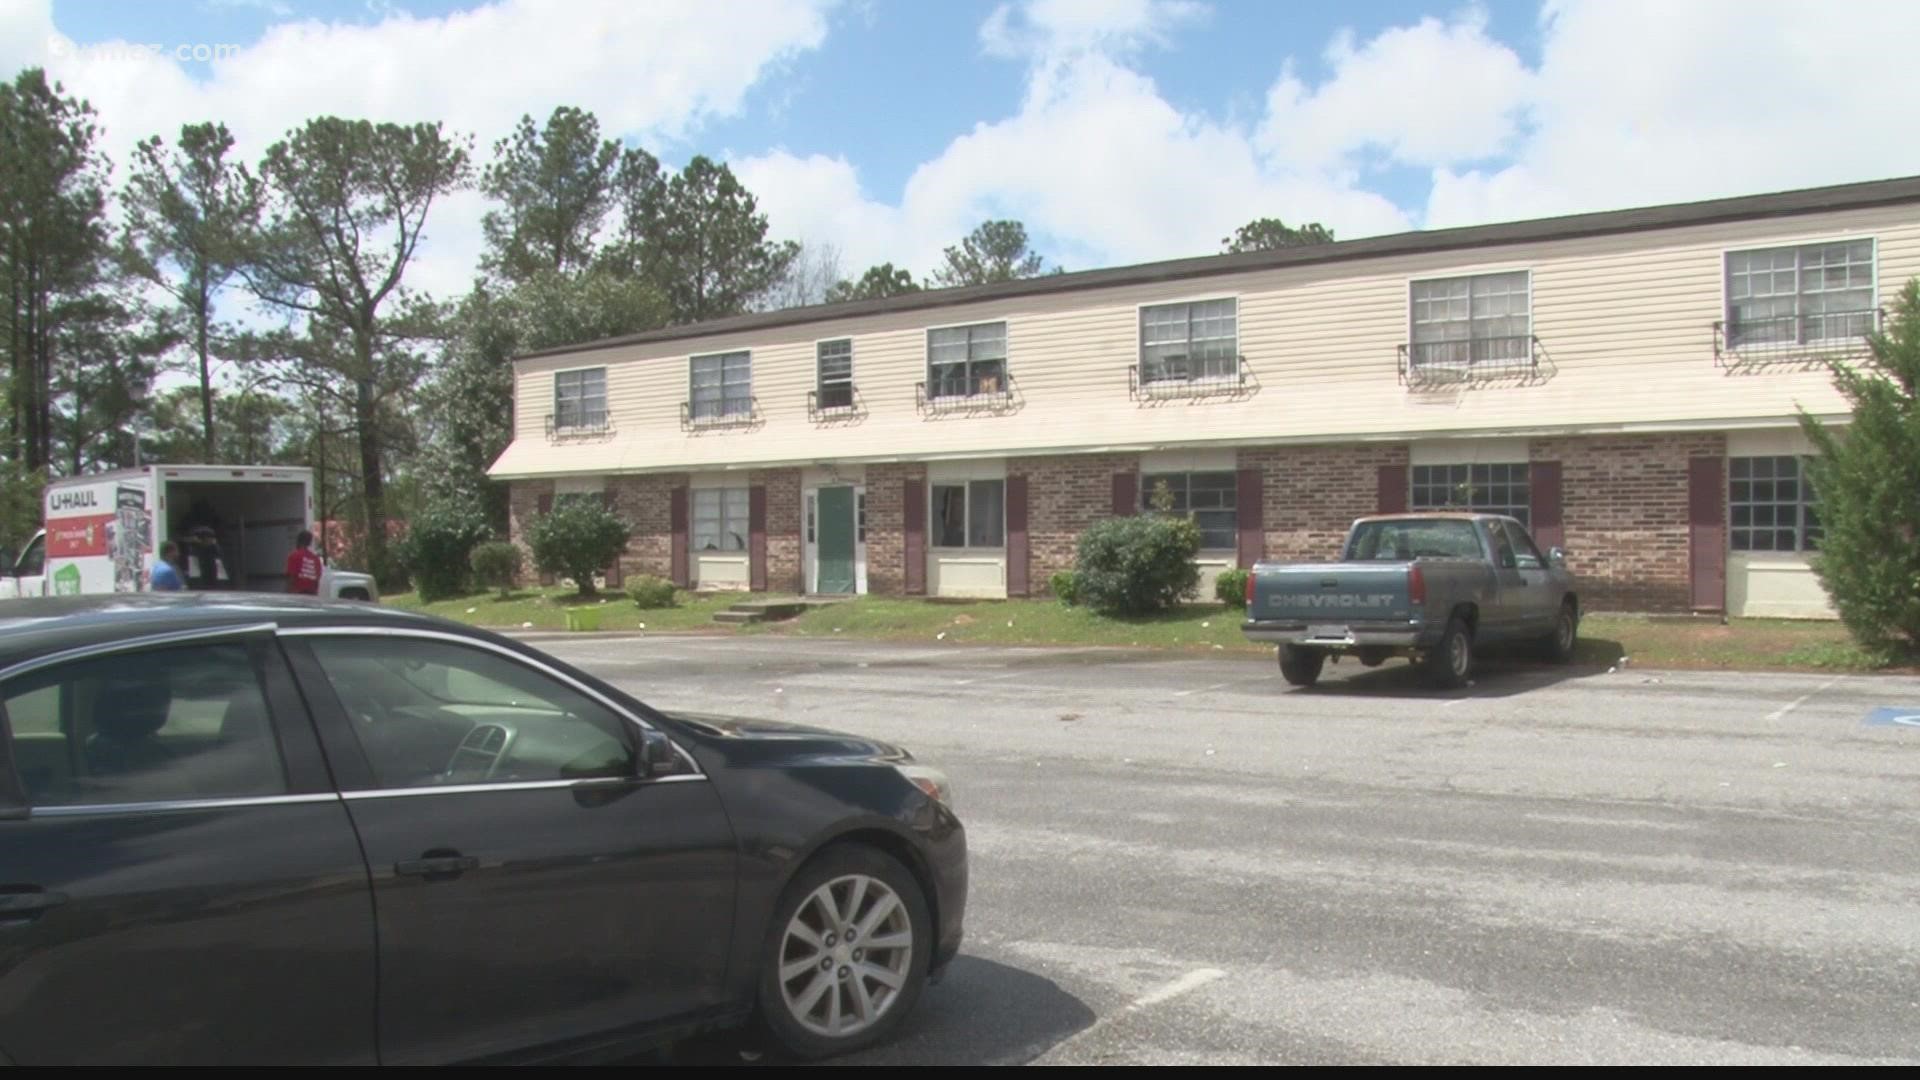 According to Bibb County spokesman Chris Floore, 15 apartment units, or 37 people, have been moved to a hotel